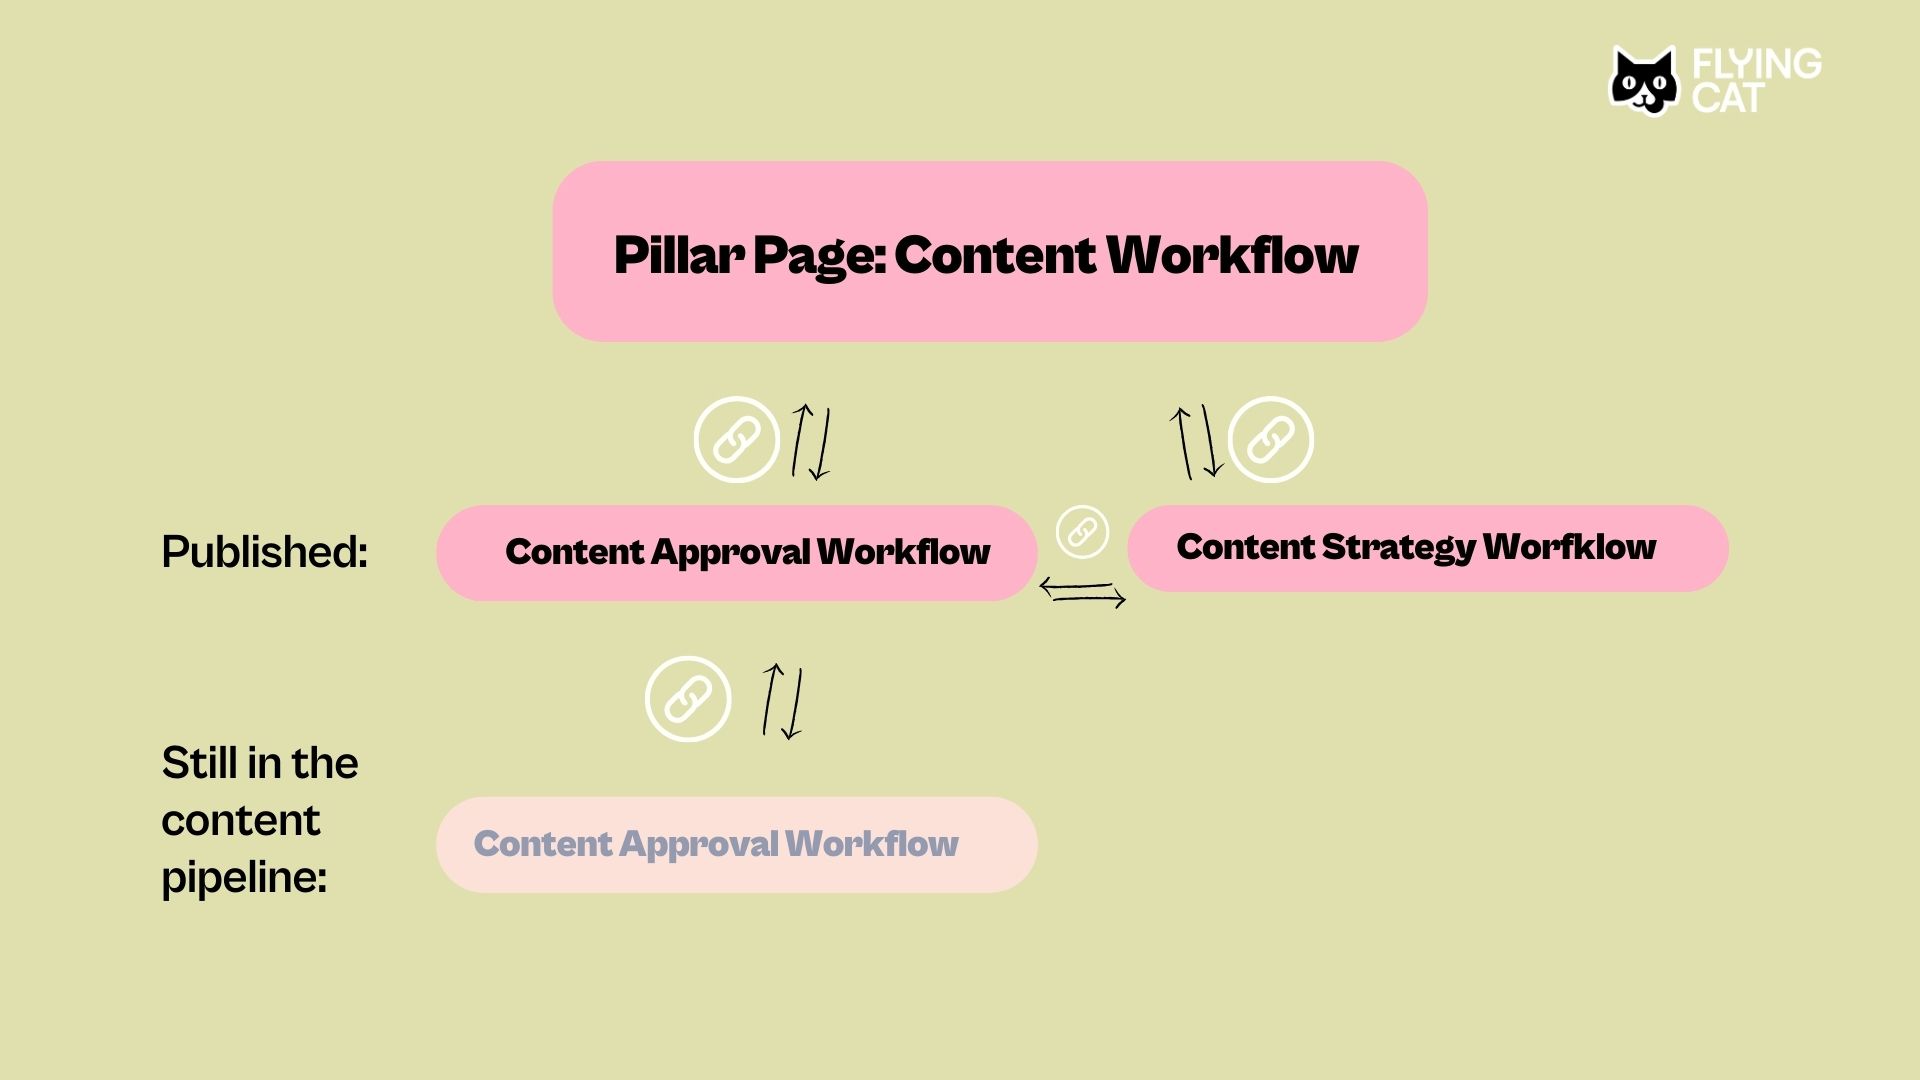 How to include internal linking into the content management workflow.